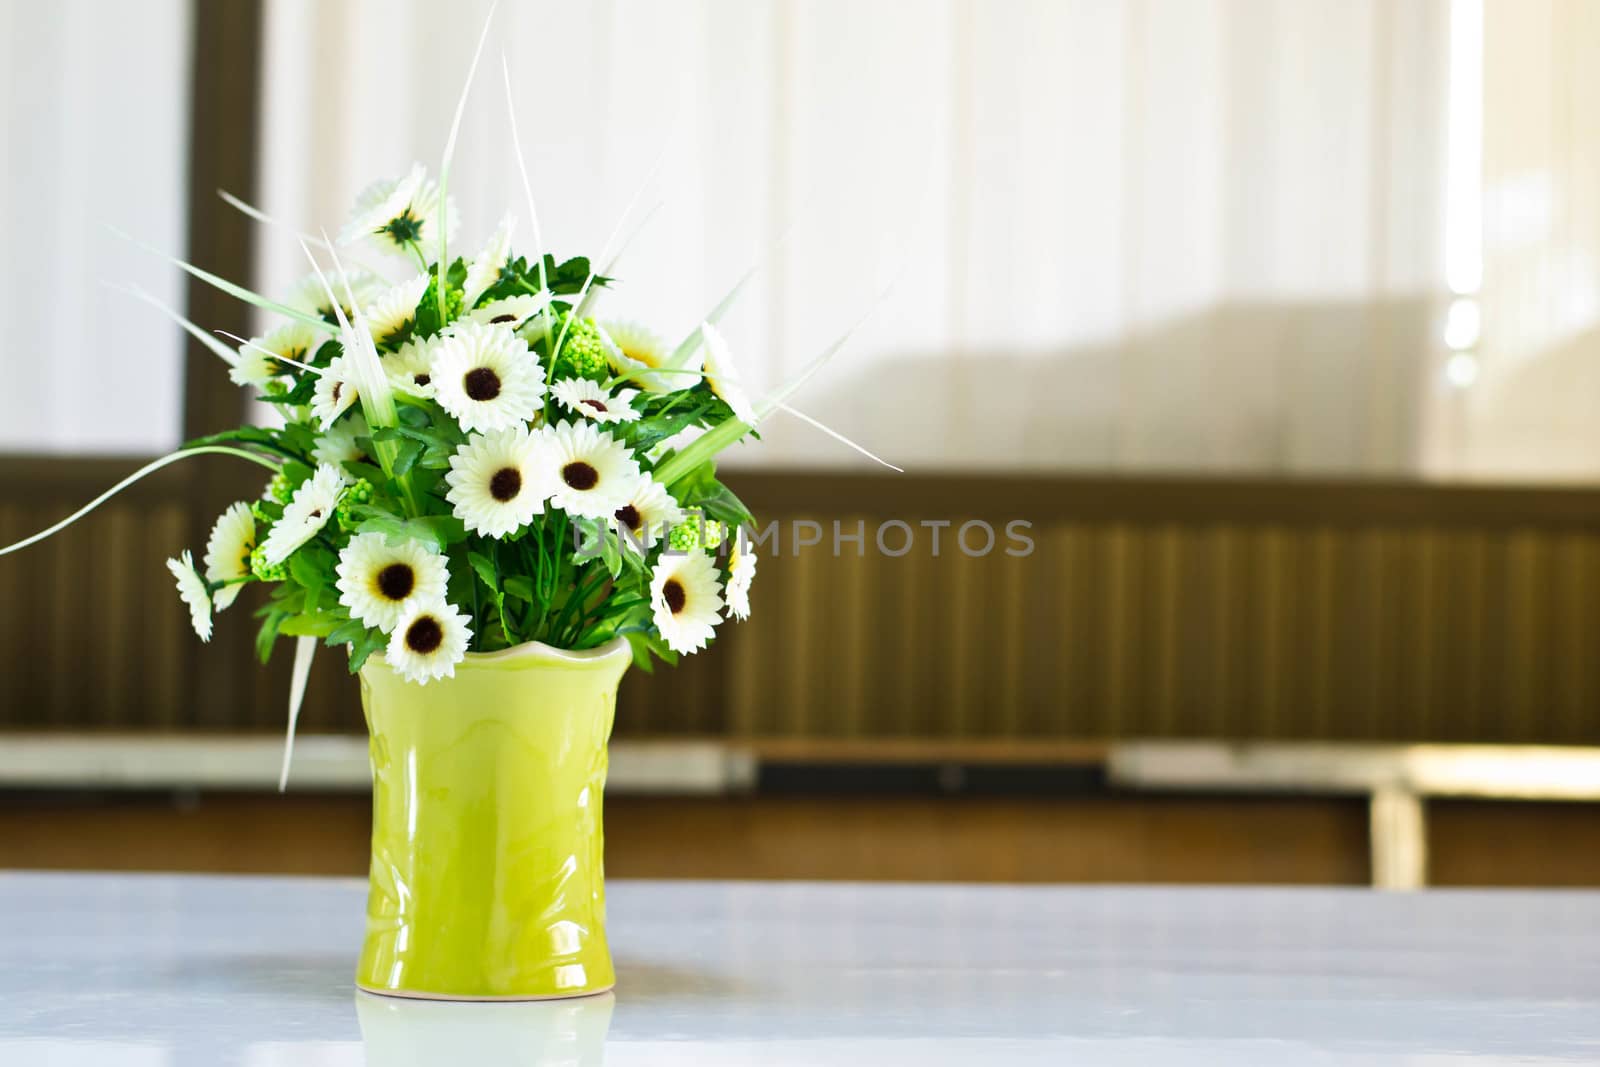  Beautiful flower in a vase on wooden table